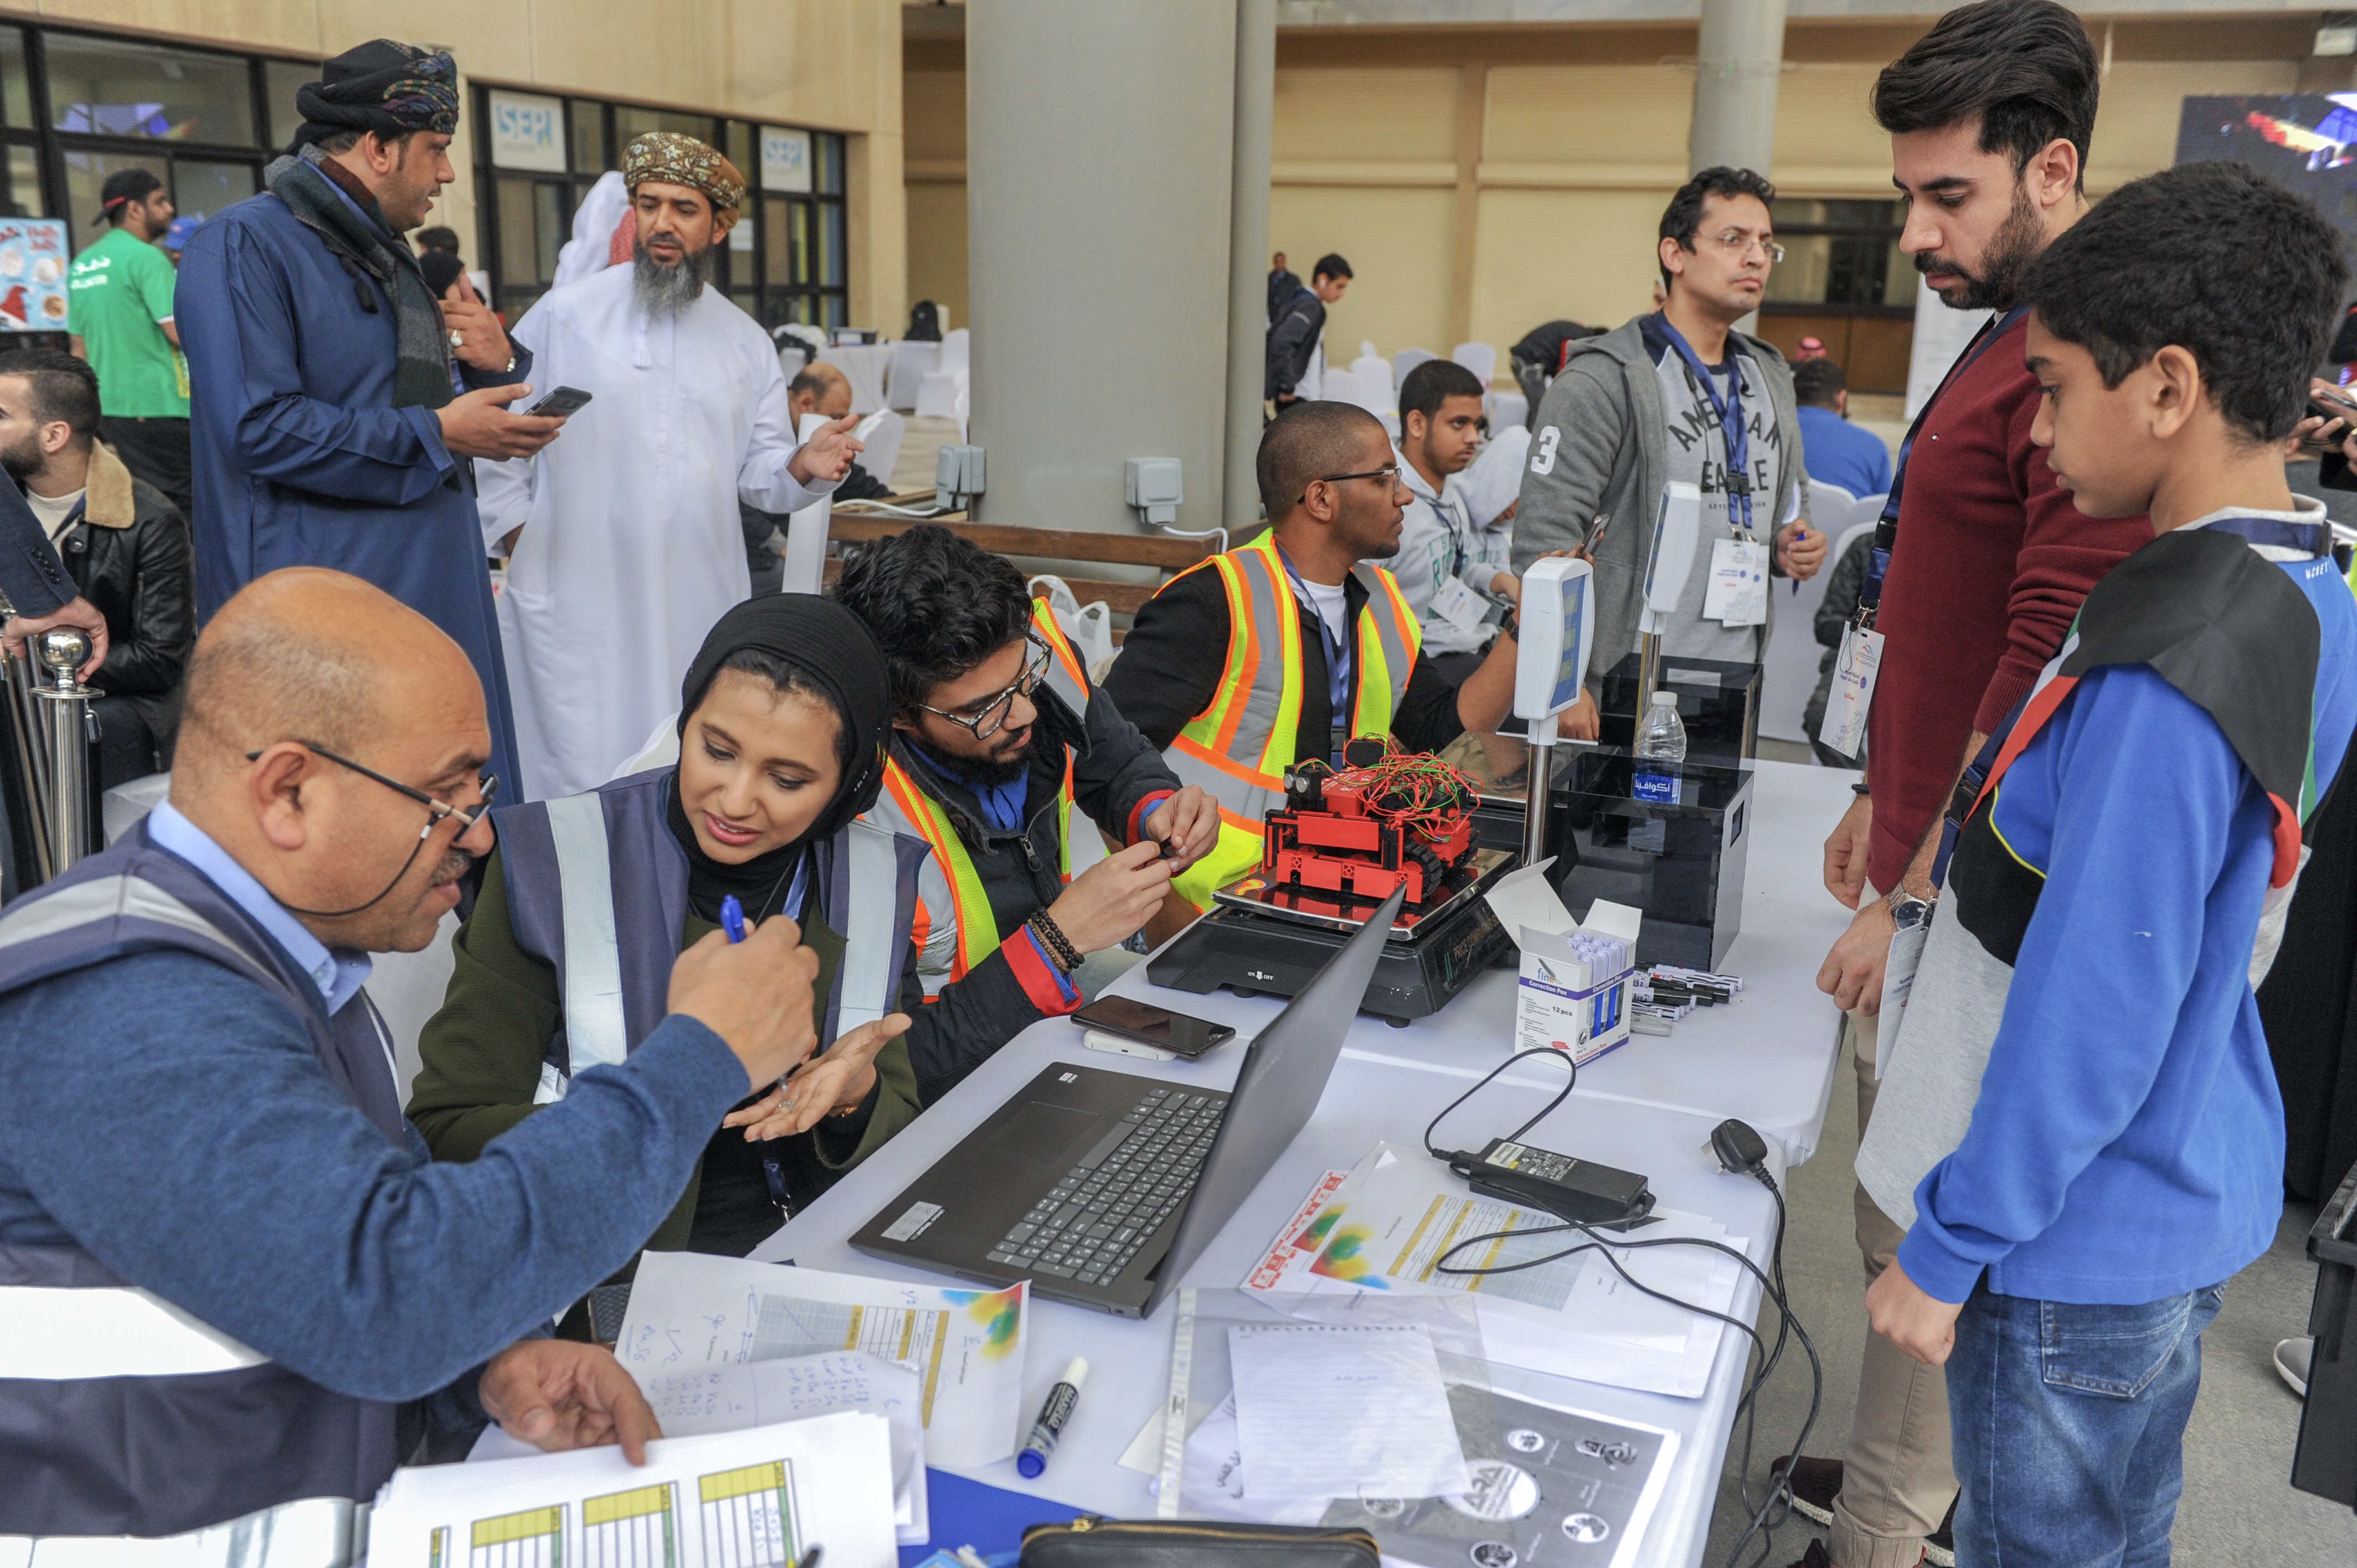 Twelfth Arab Robotics Competition meets the eye with some 350 participants eagerly displaying their inventions during the two-day event